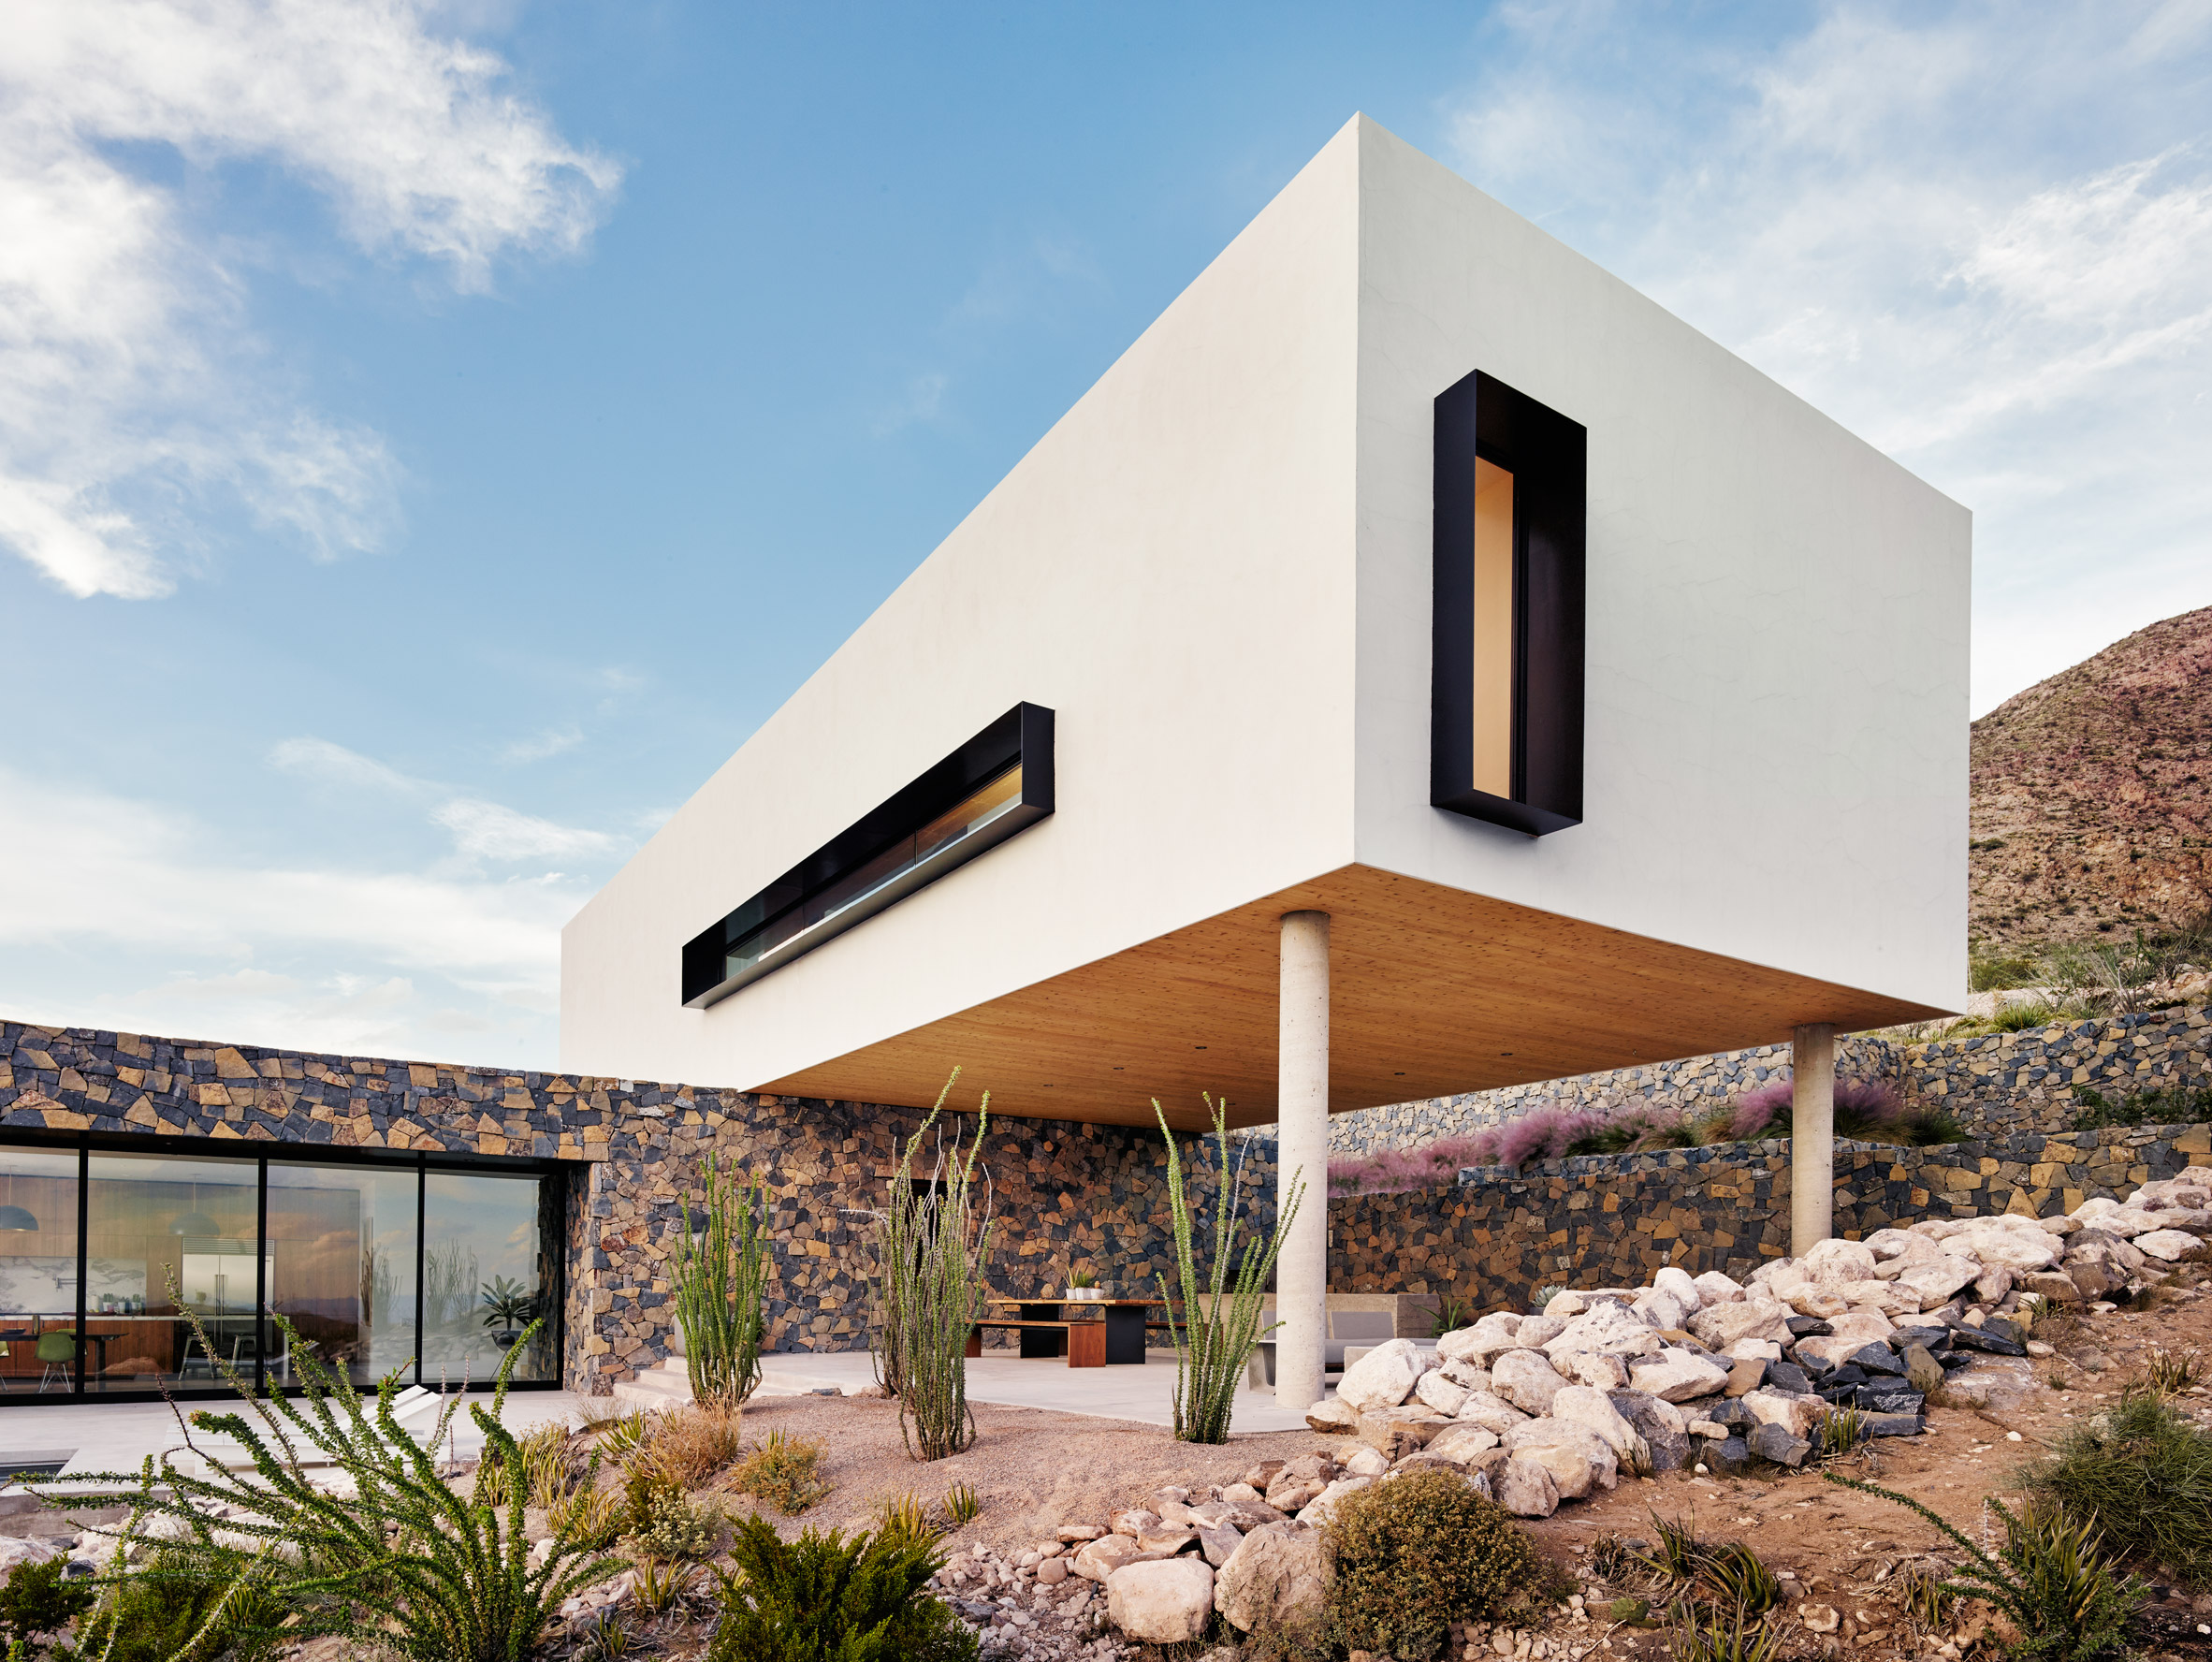 Volcanic stone contrasts with white stucco at Texas desert home by Hazelbaker Rush